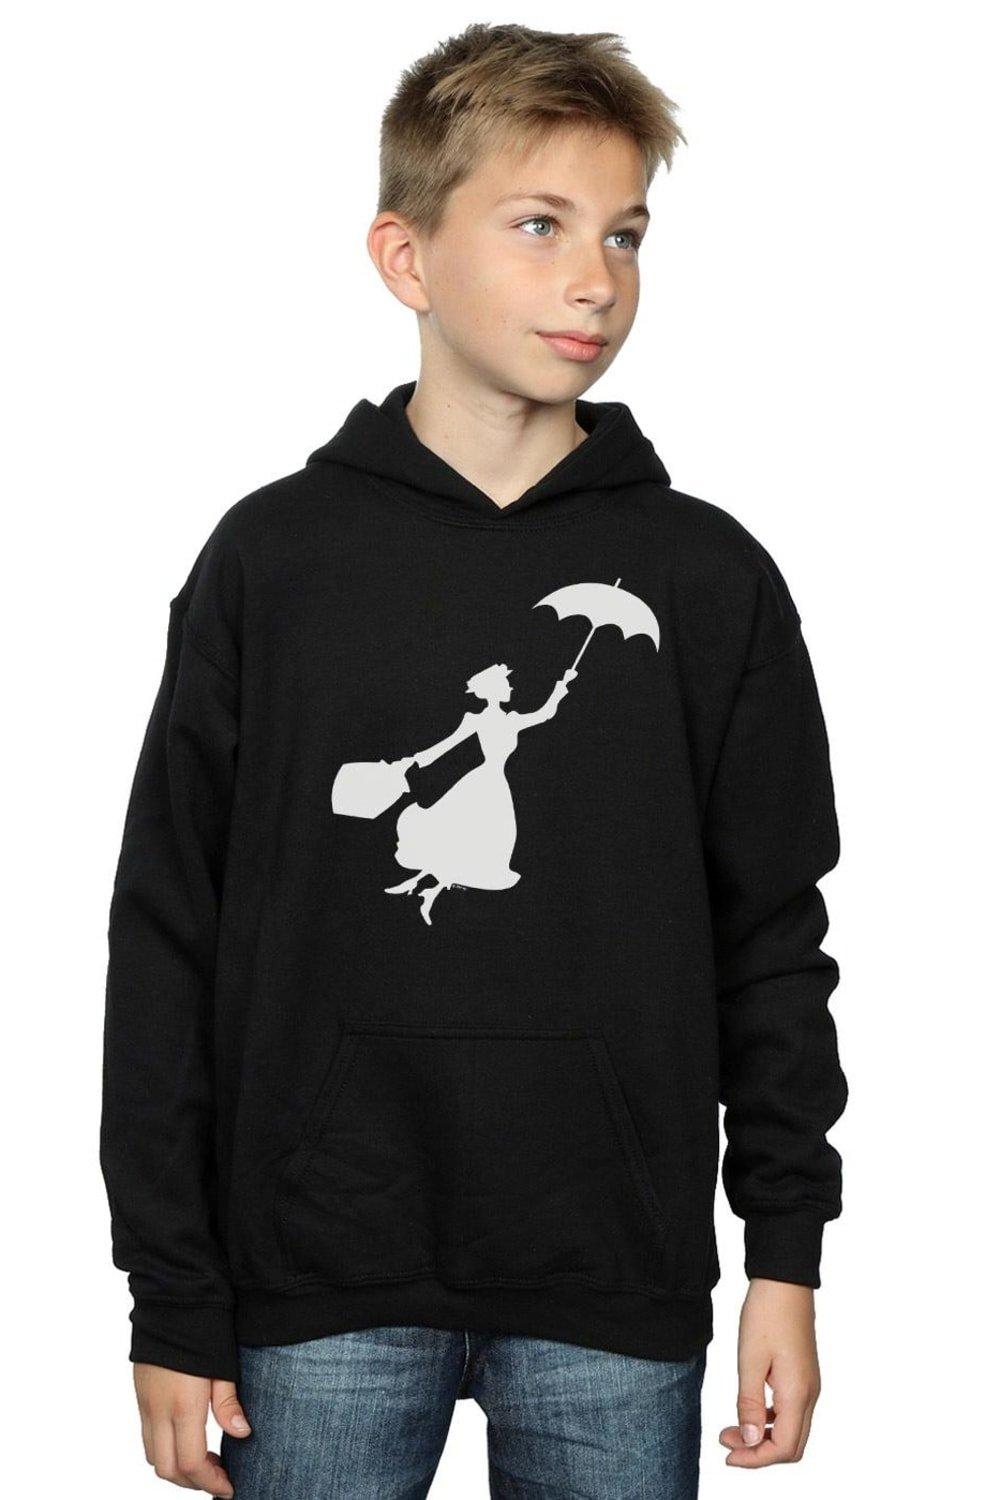 Mary Poppins Flying Silhouette Hoodie